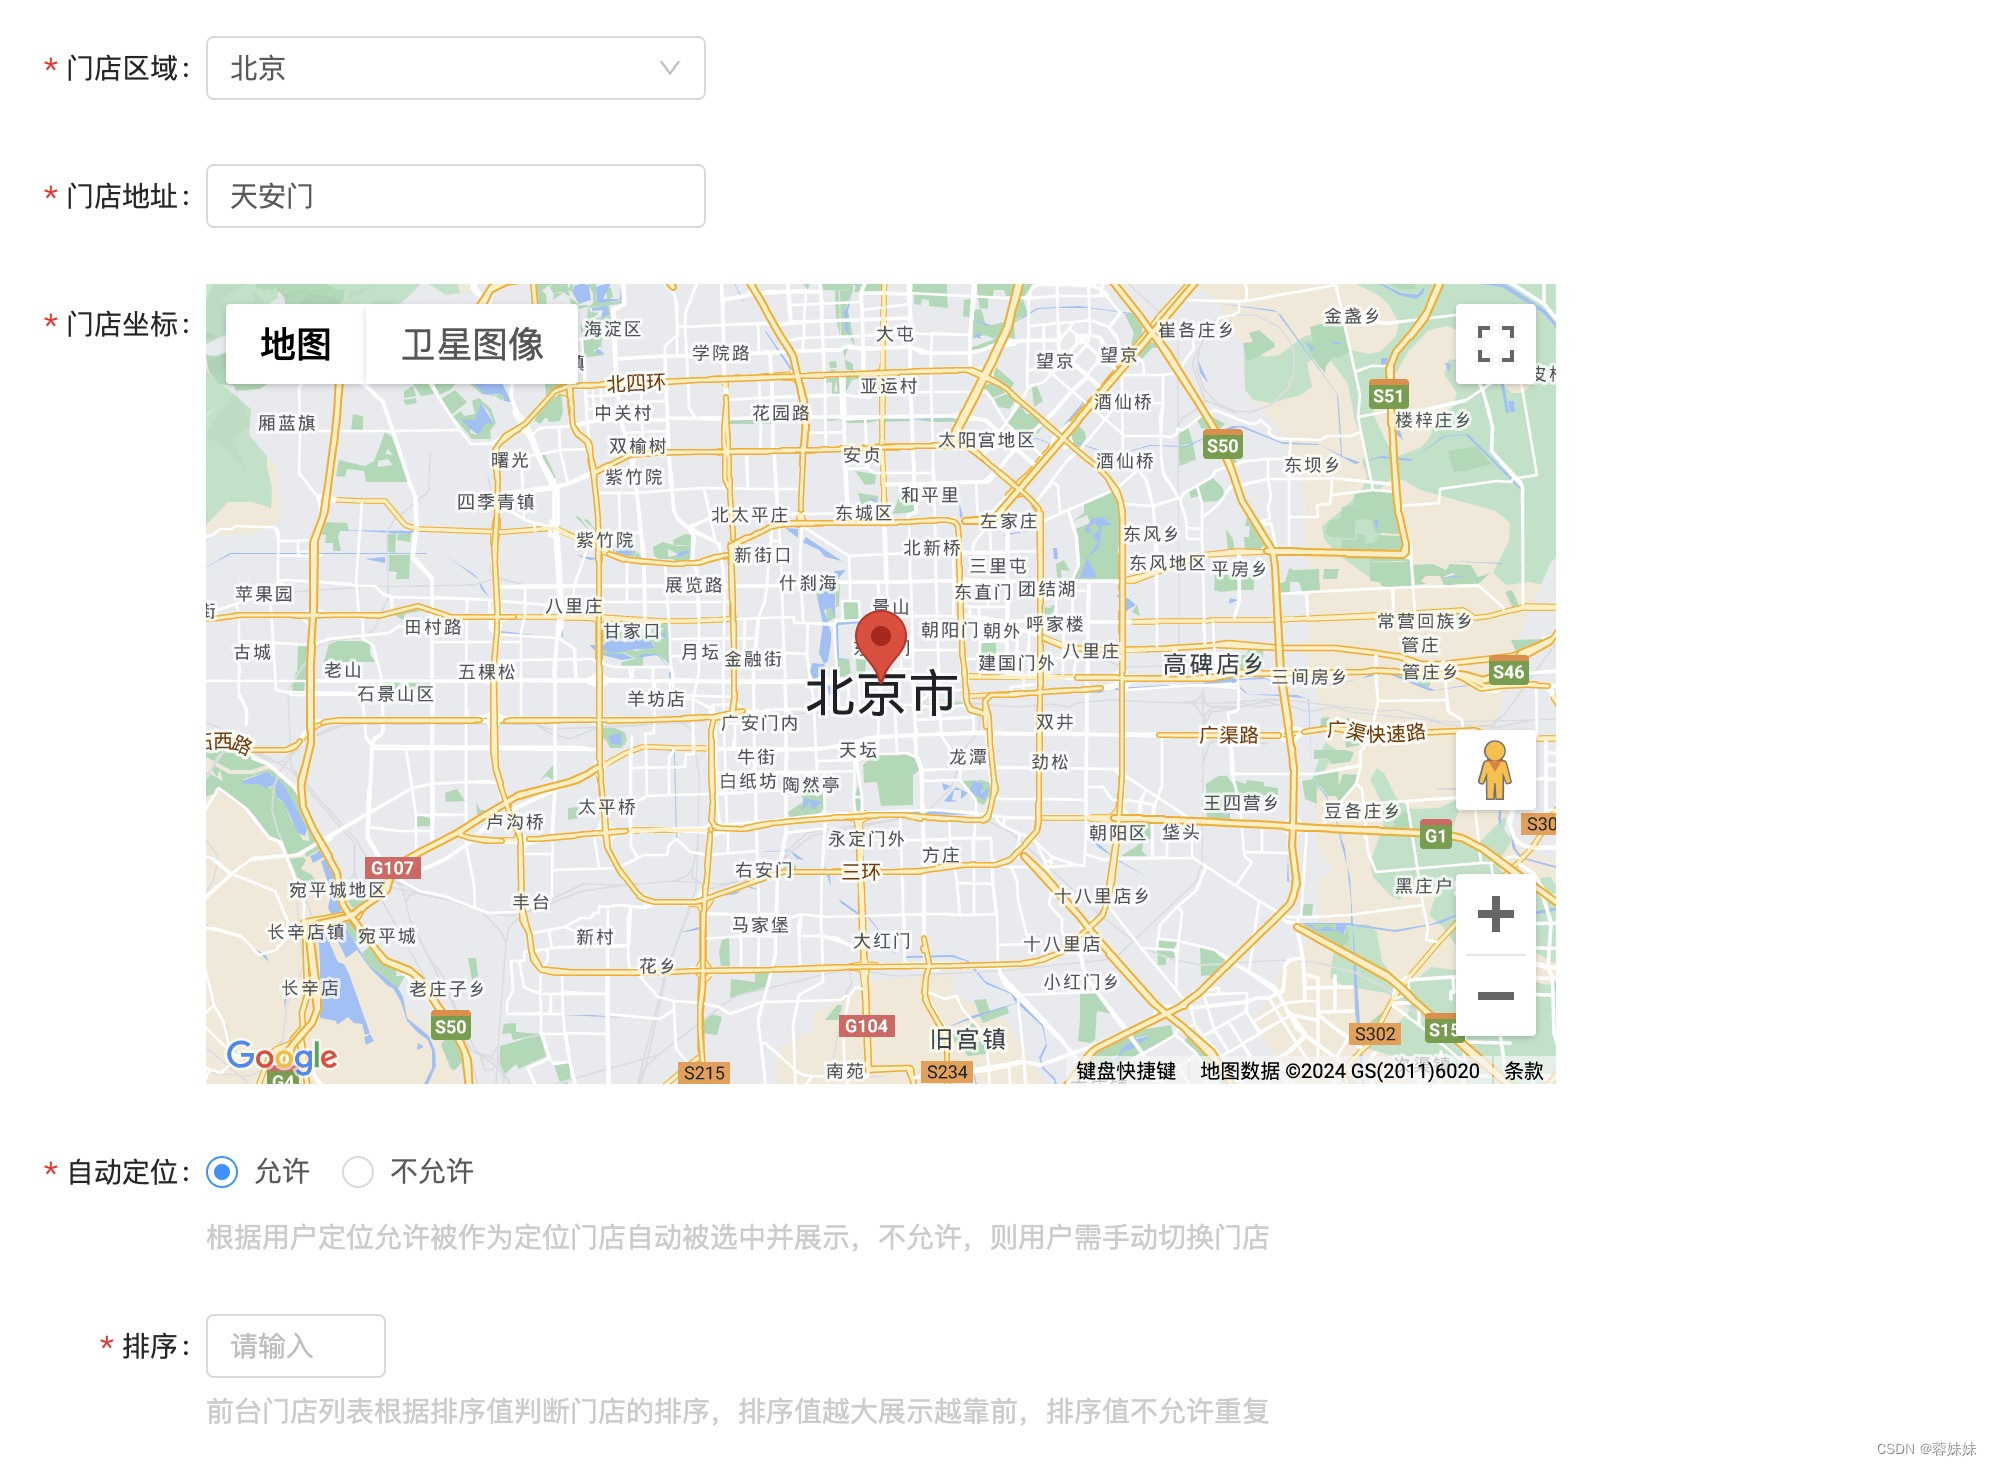 @react-google-maps/<span style='color:red;'>api</span>实现谷歌<span style='color:red;'>地图</span>嵌入React项目中，<span style='color:red;'>并且</span>做到<span style='color:red;'>点</span><span style='color:red;'>击</span><span style='color:red;'>地图</span>任意一处，<span style='color:red;'>获得</span>它<span style='color:red;'>的</span>经纬度